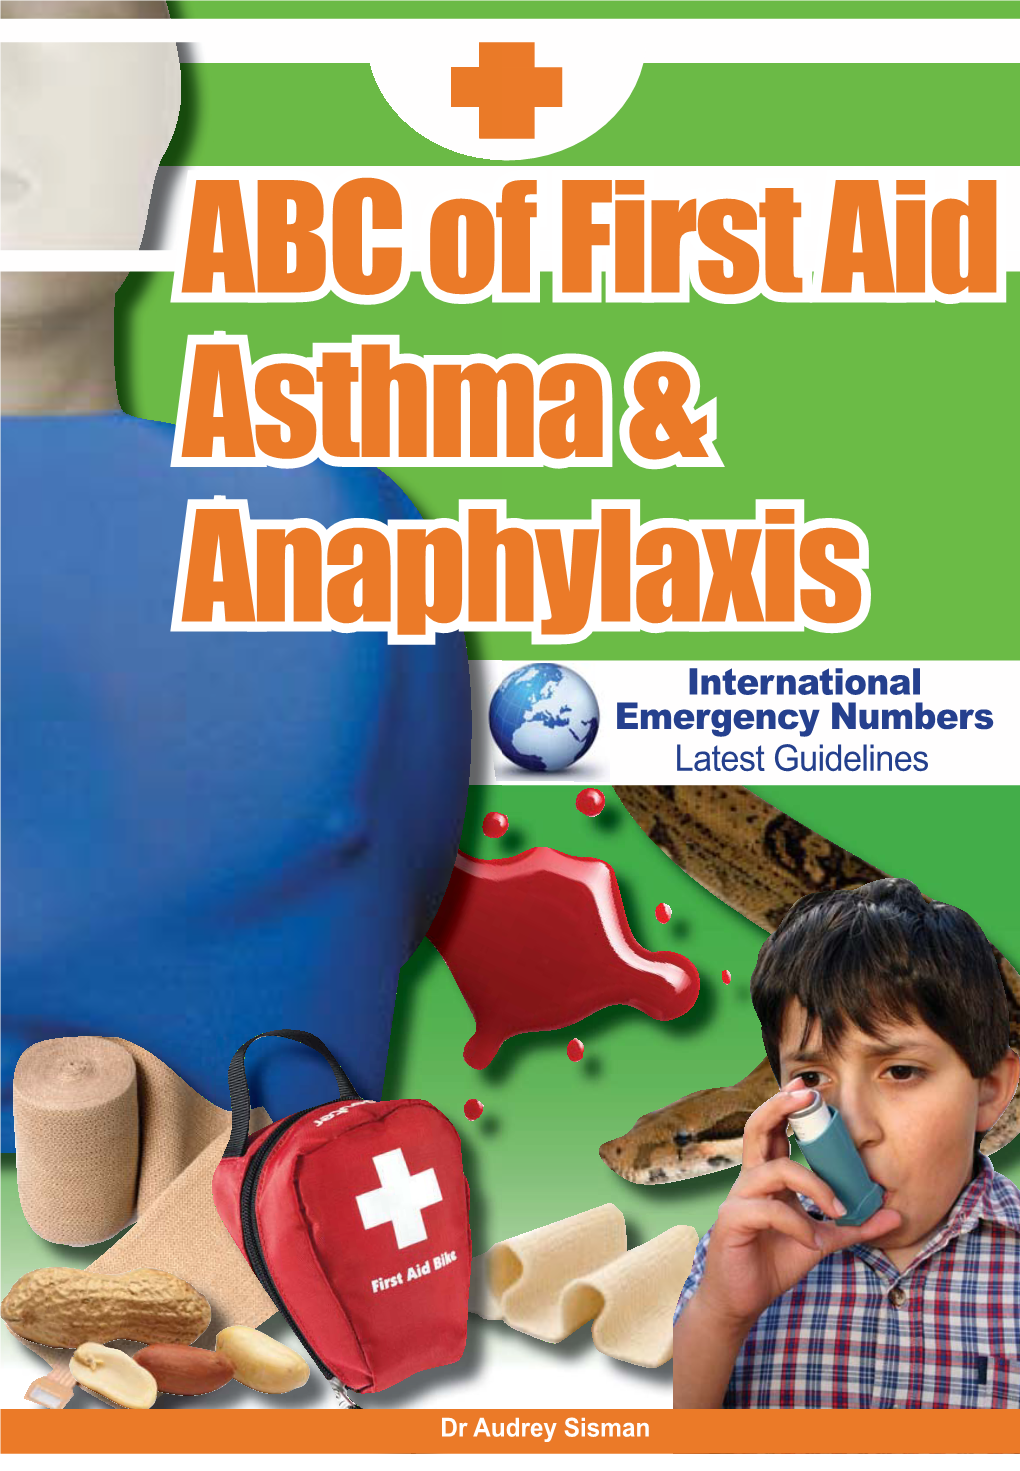 ABC of First Aid, Asthma and Anaphylaxis